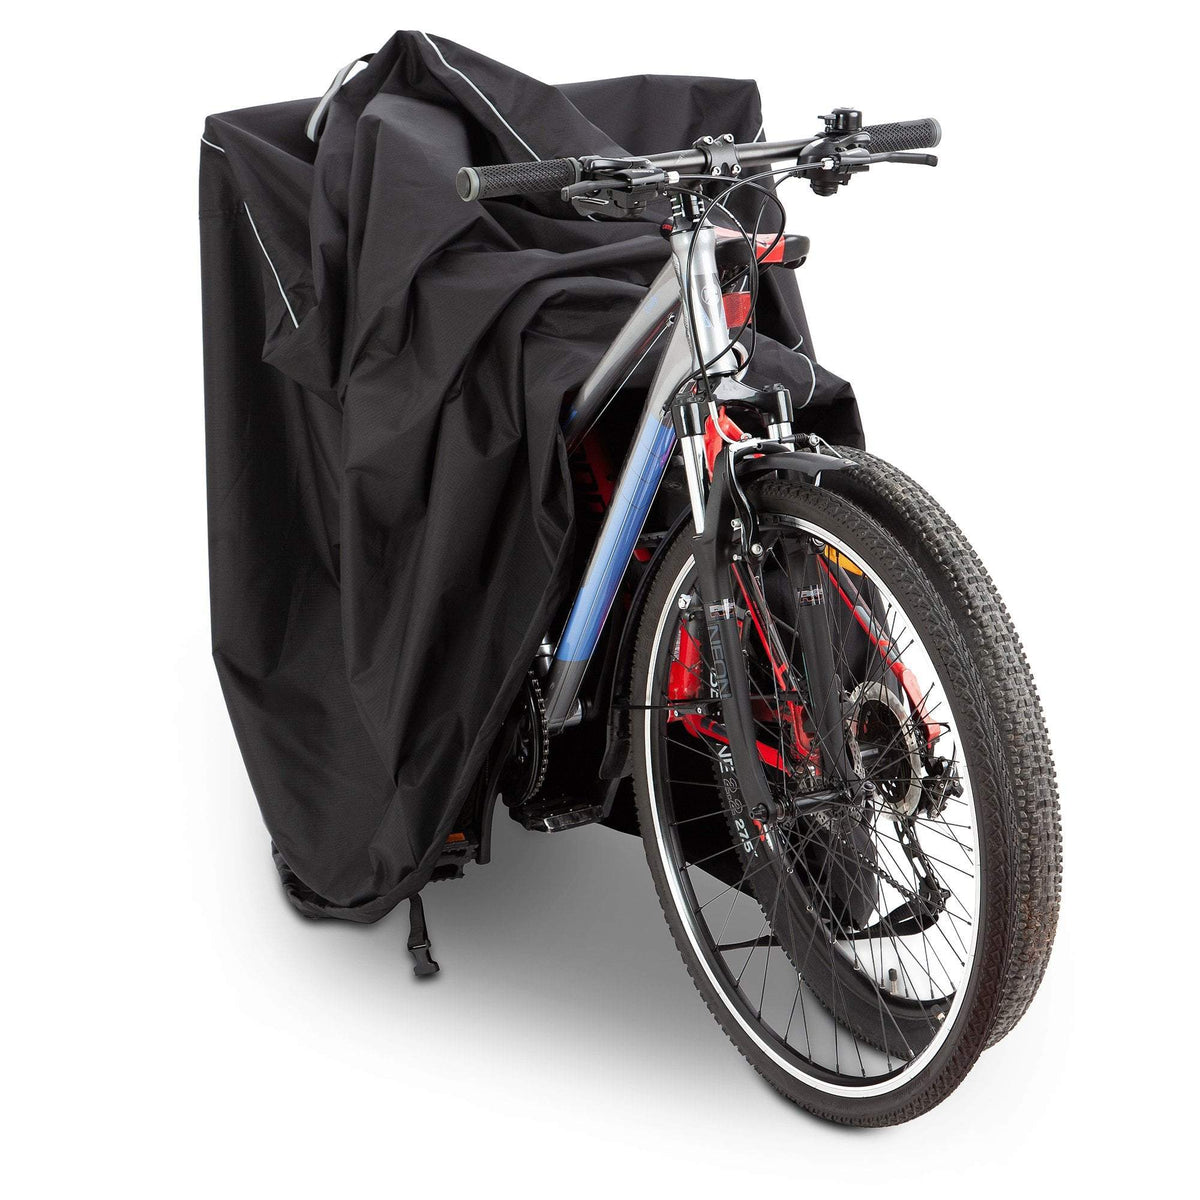 Team Obsidian: Bike Covers | Styles - Outdoor Storage or  Transportation/Travel | Waterproof, Heavy Duty, 210D Oxford Ripstop  Materials | Sizes L, XL